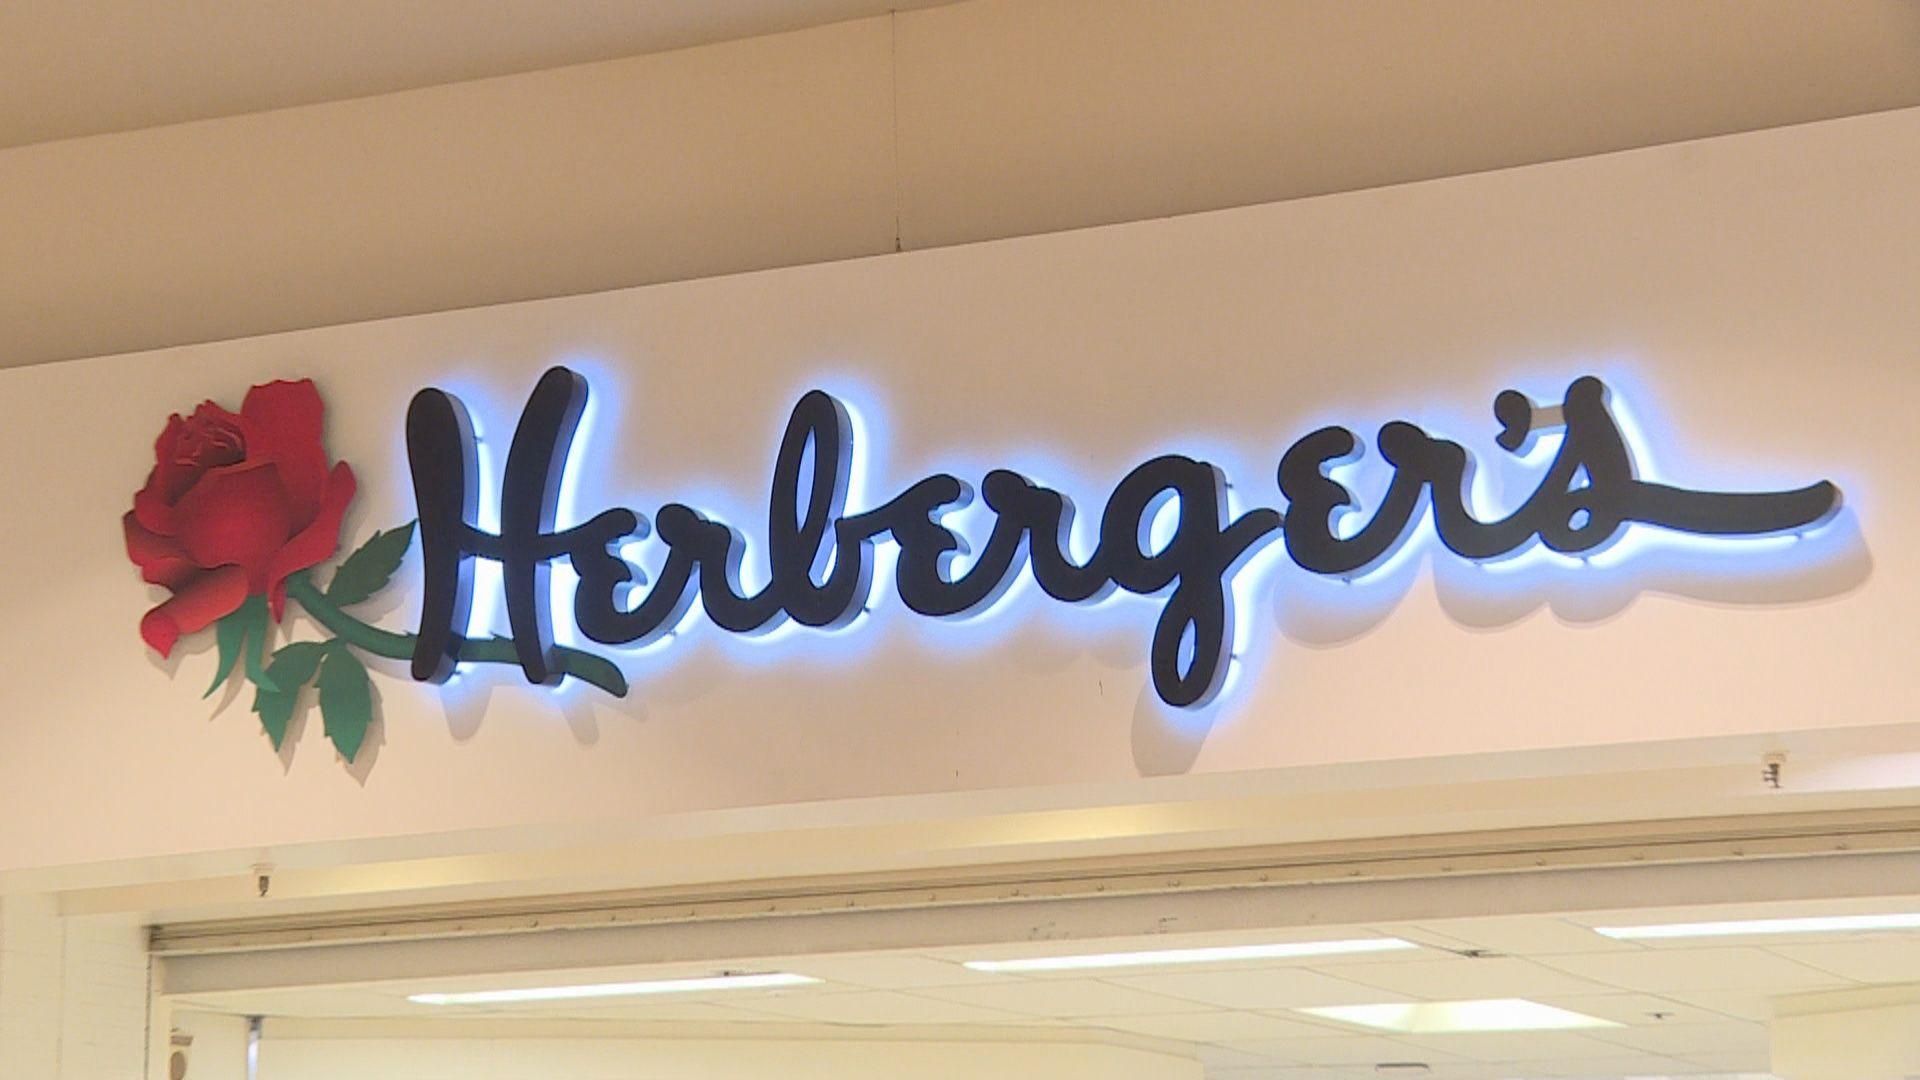 Herberger's Logo - Locals say goodbye to Herberger's stores